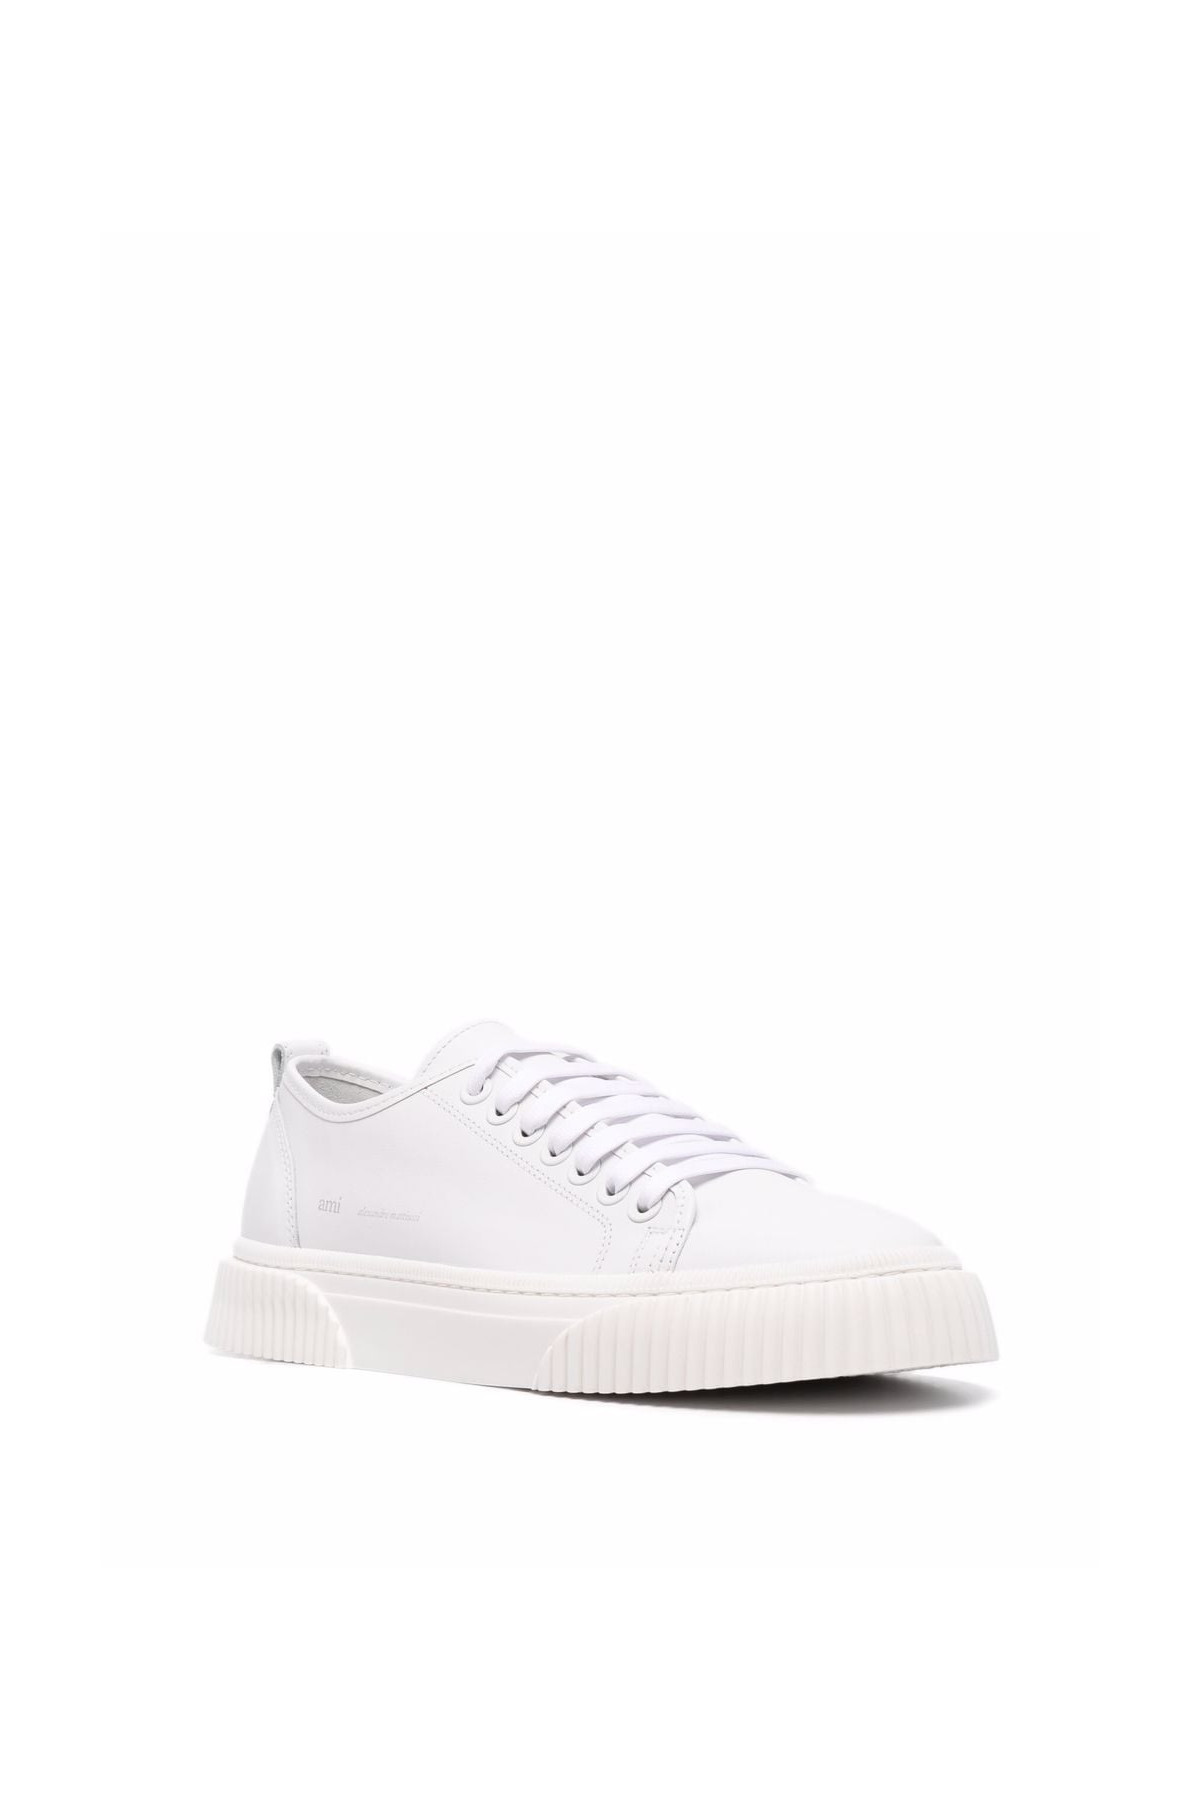 LOW-TOP SNEAKERS AMI SOLE USN401.857